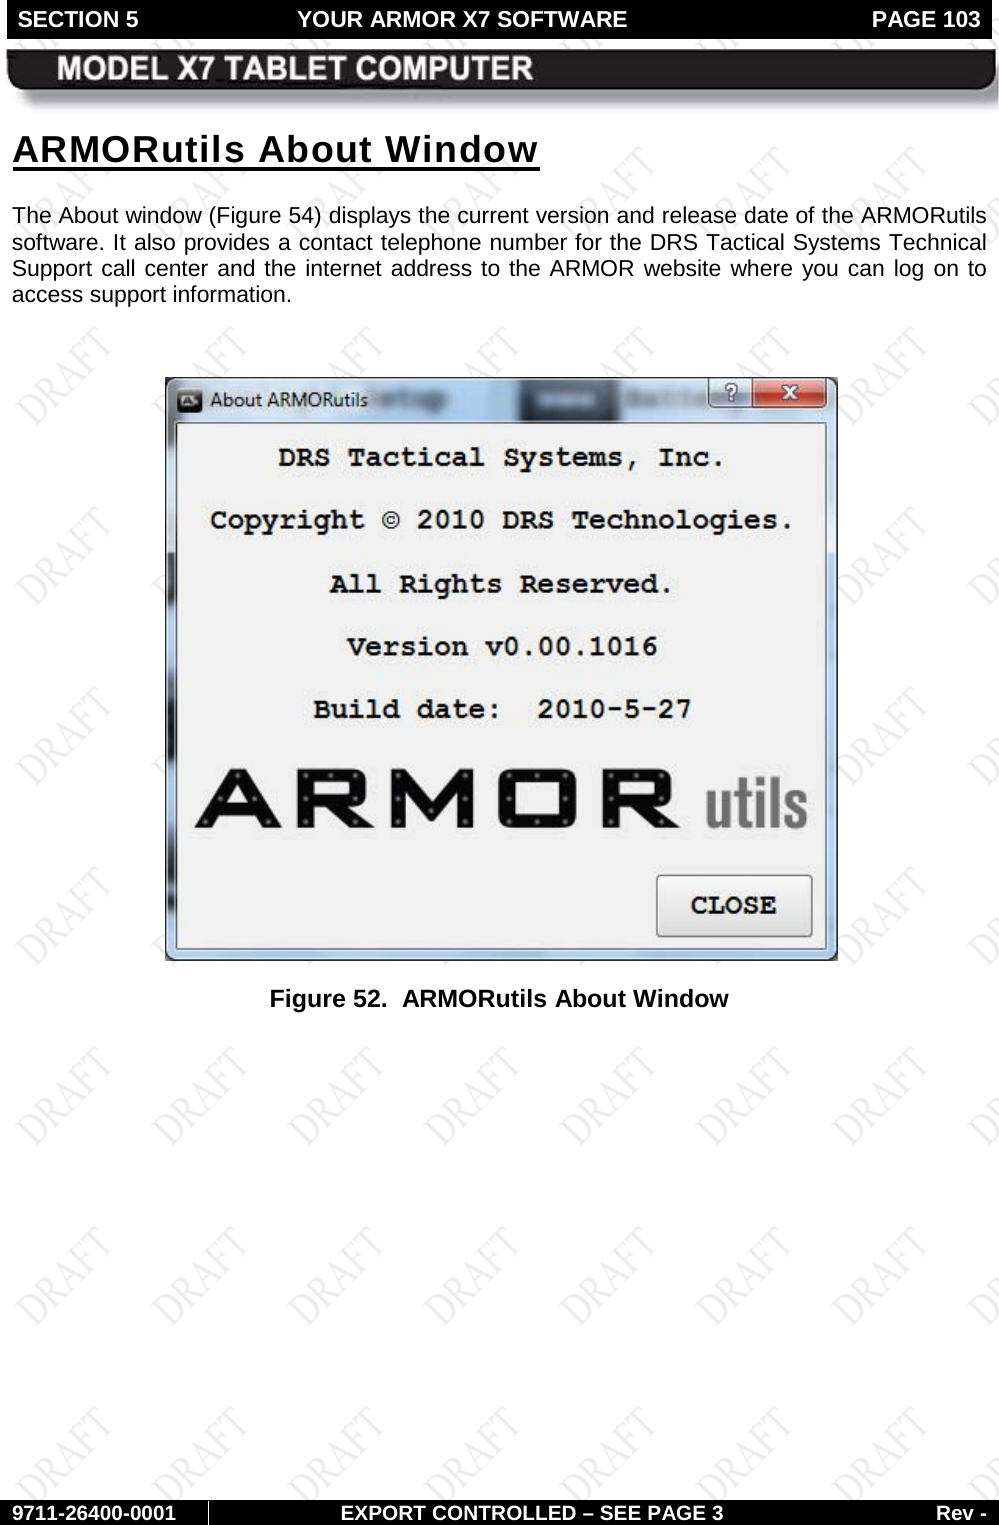 SECTION 5 YOUR ARMOR X7 SOFTWARE  PAGE 103        9711-26400-0001 EXPORT CONTROLLED – SEE PAGE 3 Rev - ARMORutils About Window The About window (Figure 54) displays the current version and release date of the ARMORutils software. It also provides a contact telephone number for the DRS Tactical Systems Technical Support call center and the internet address to the ARMOR website where you can log on to access support information.   Figure 52.  ARMORutils About Window   